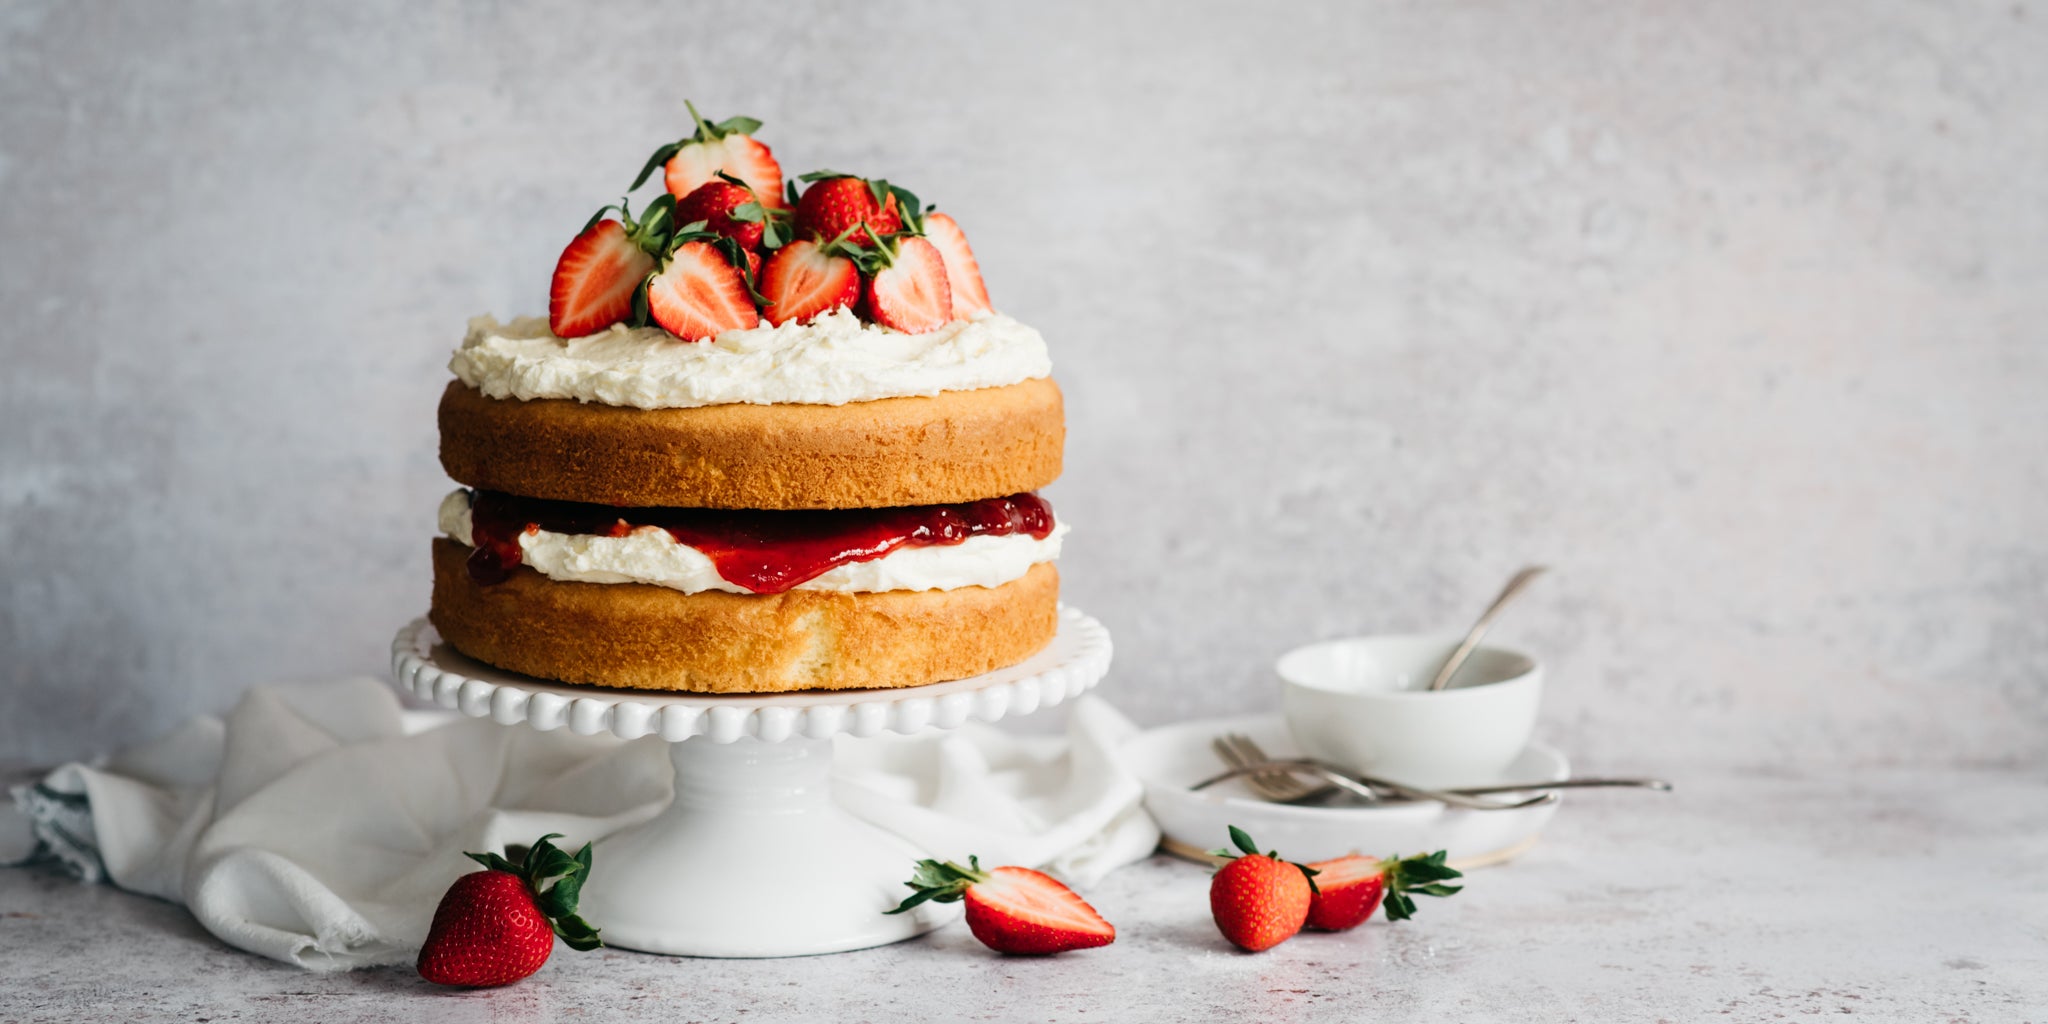 Gluten Free Victoria Sponge served on a cake stand, topped with sliced strawberries